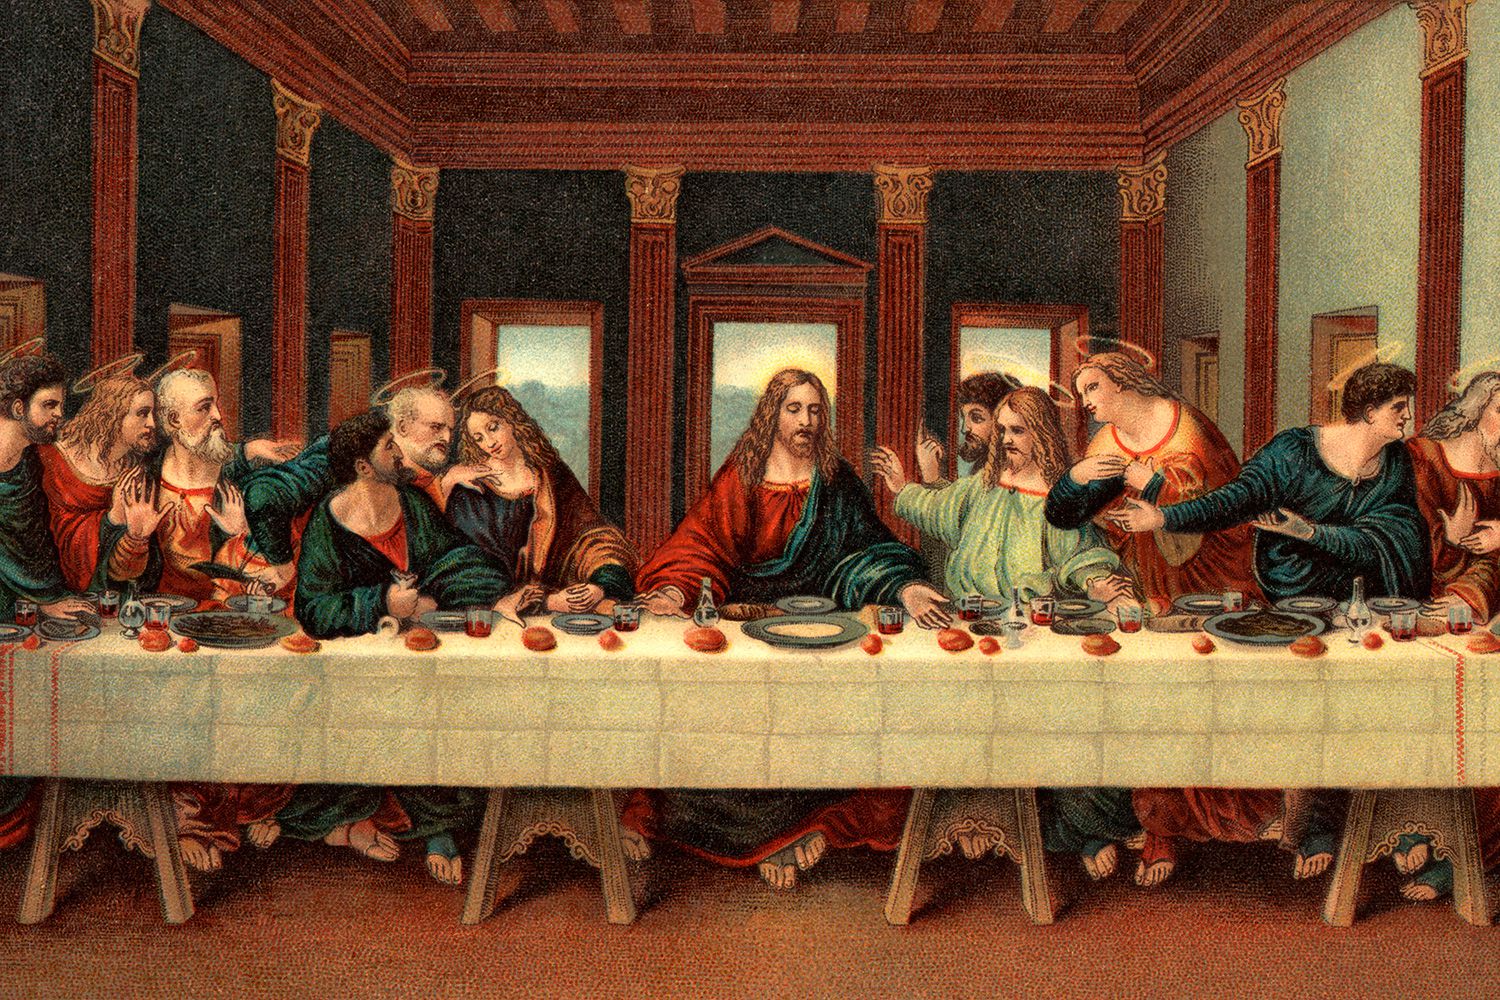 Most People Can’t Get 12/15 on This General Knowledge Quiz — Can You? The Last Supper